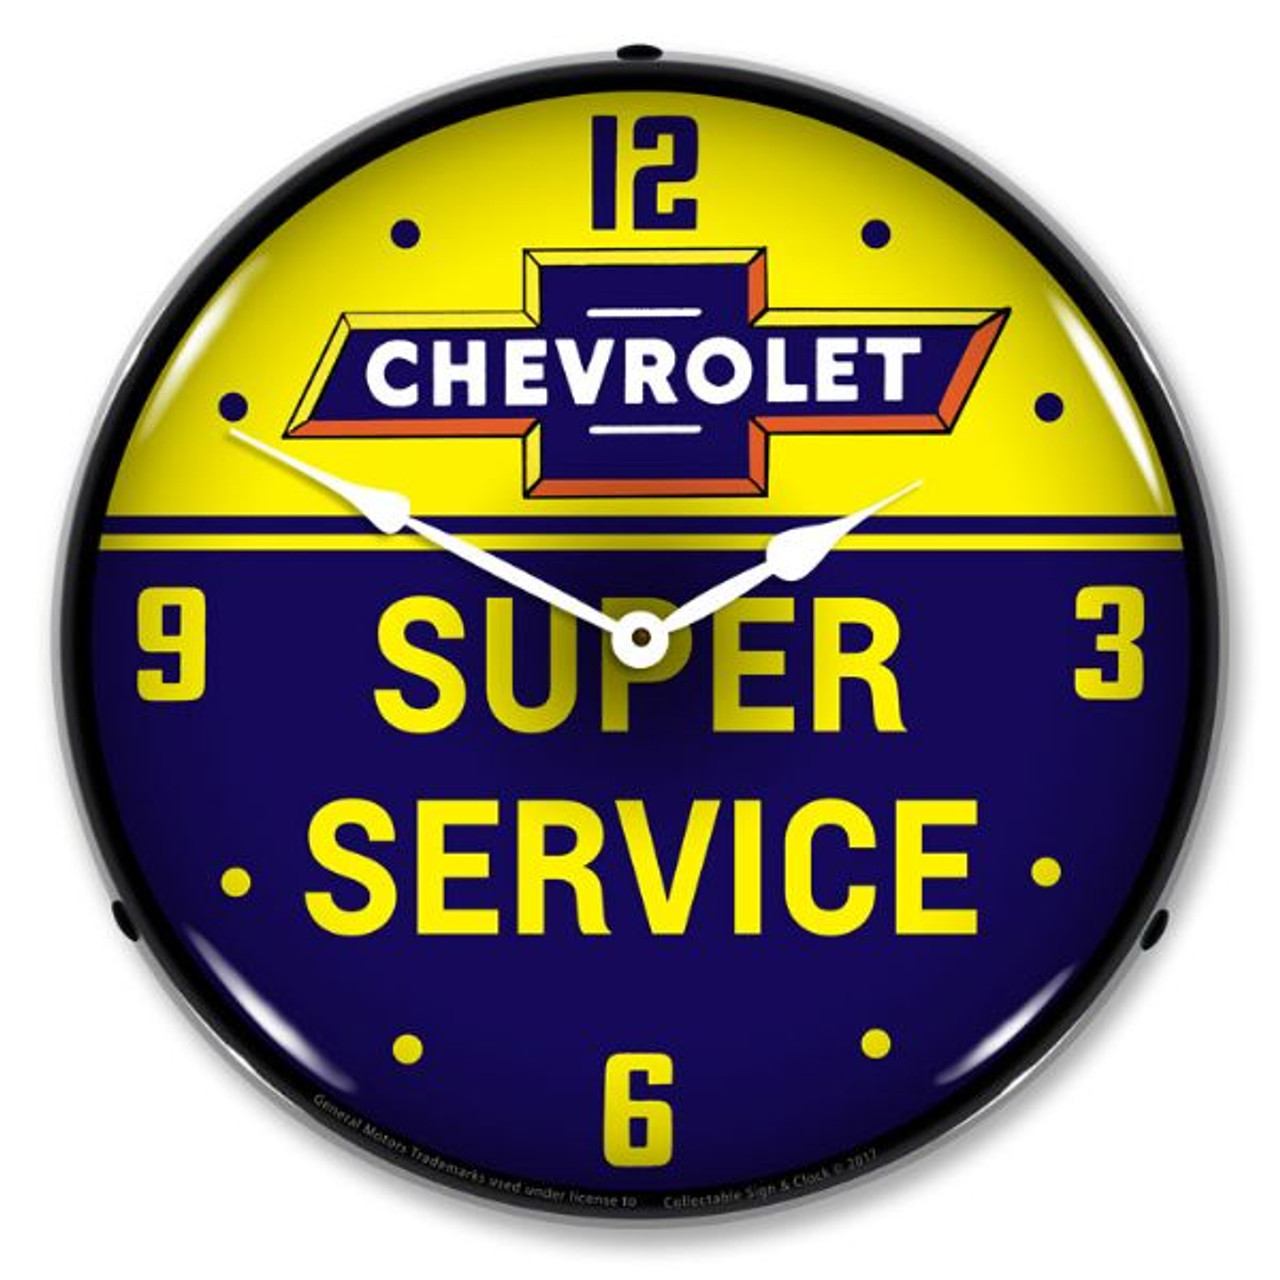 Chevrolet Bowtie Super Service LED Lighted Wall Clock 14 x 14 Inches